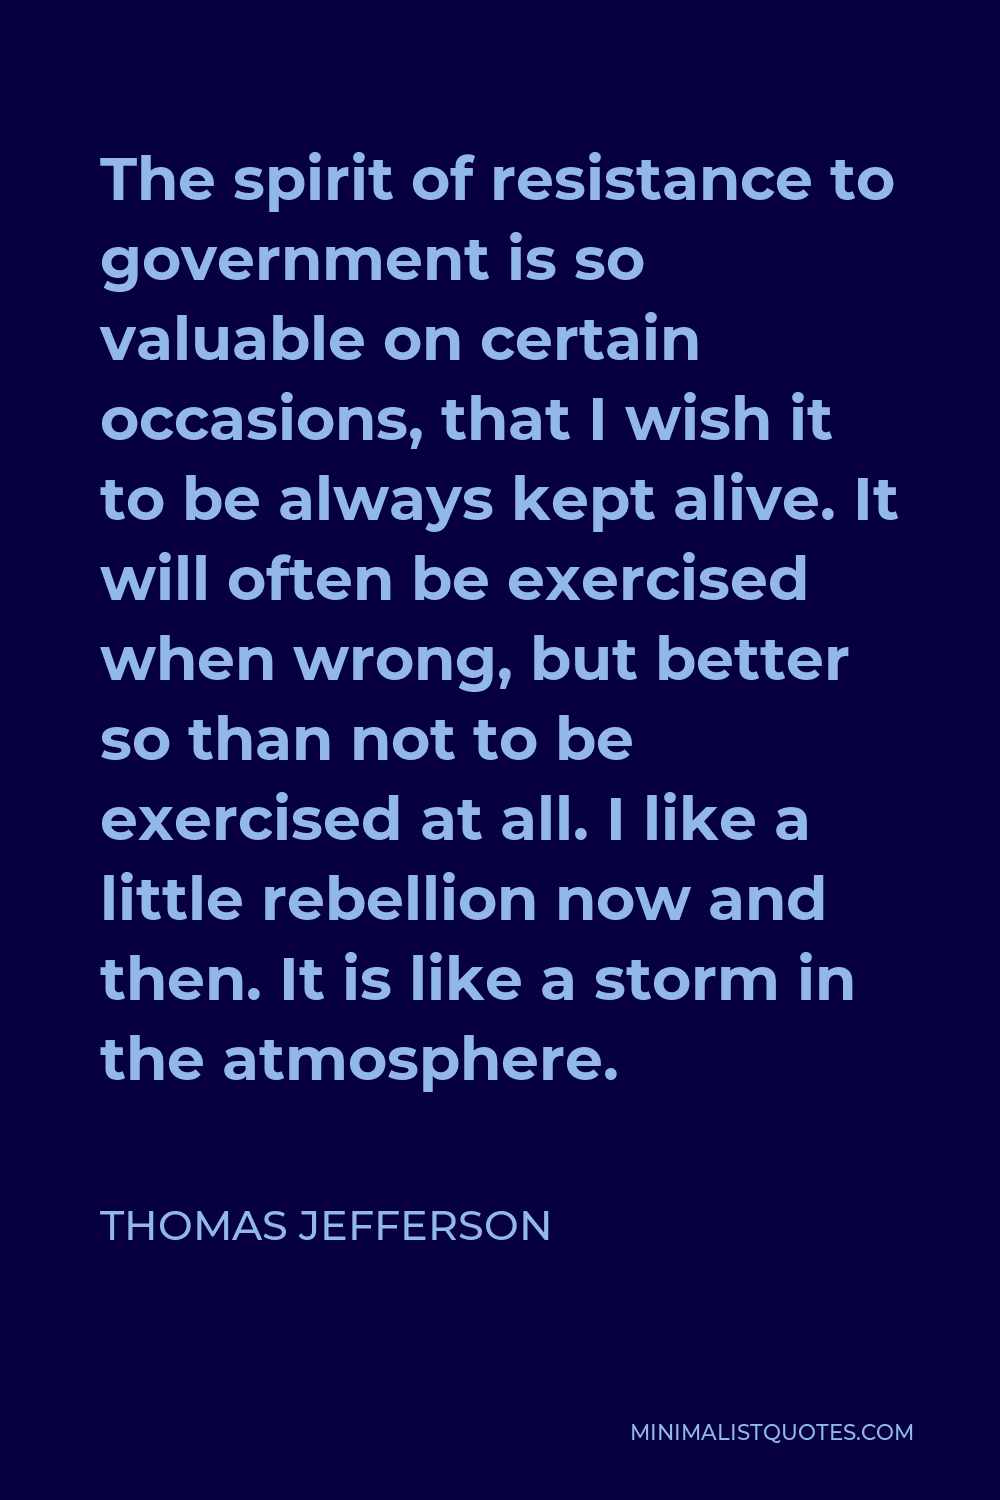 Thomas Jefferson Quote - The spirit of resistance to government is so valuable on certain occasions, that I wish it to be always kept alive. It will often be exercised when wrong, but better so than not to be exercised at all. I like a little rebellion now and then. It is like a storm in the atmosphere.